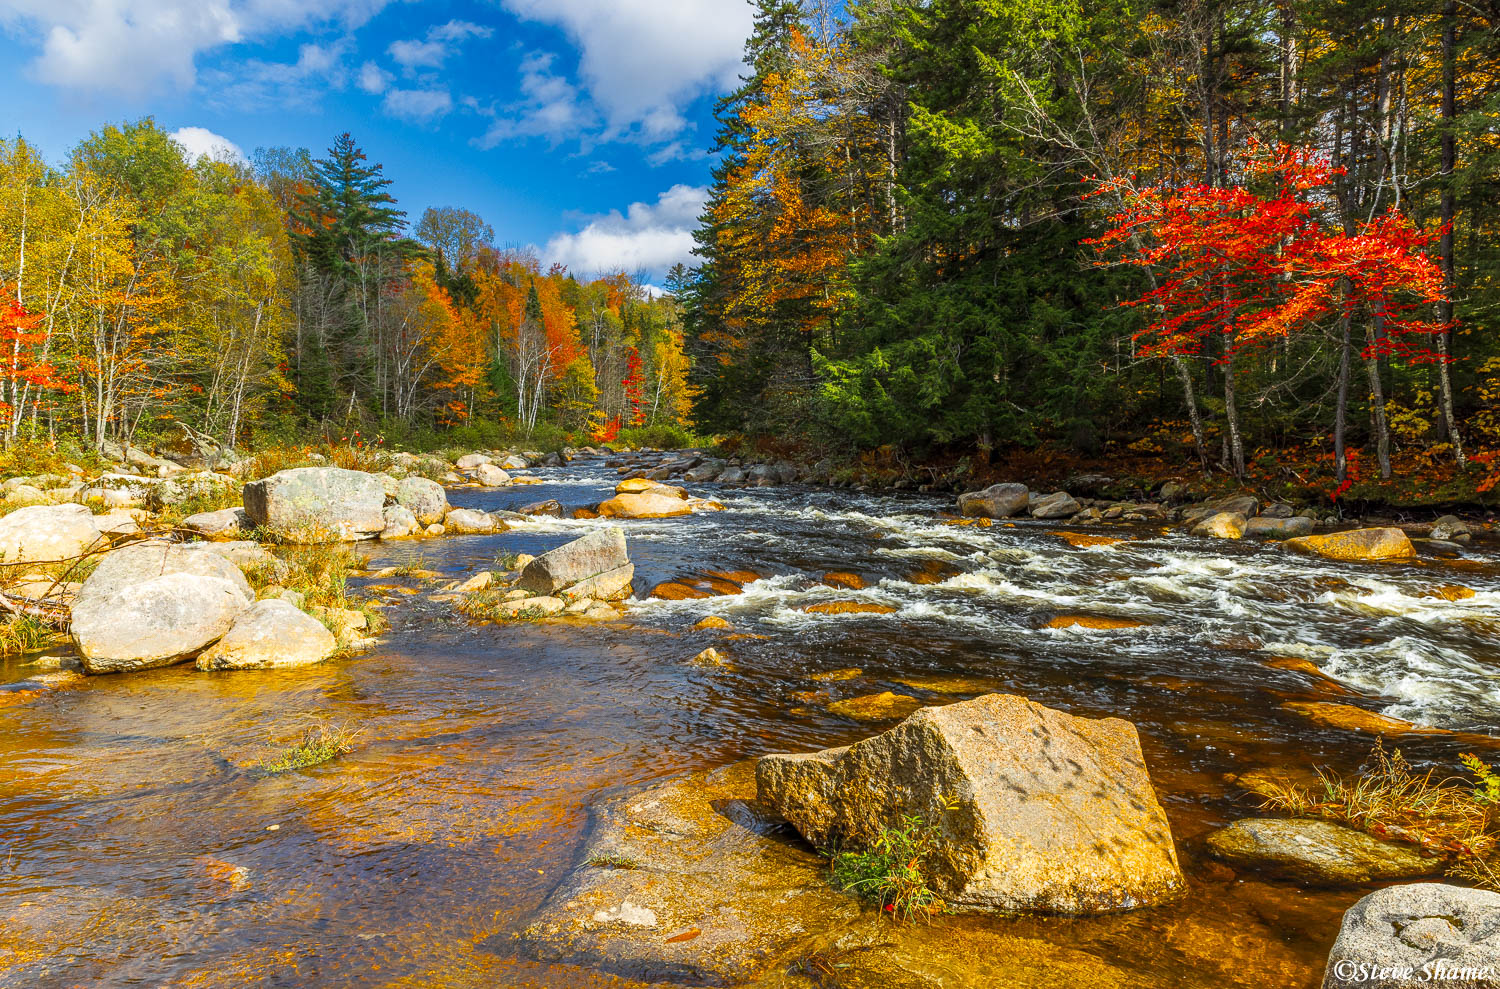 And here is the Ammonoosuc River, just north of Crawford Notch in New Hampshire.